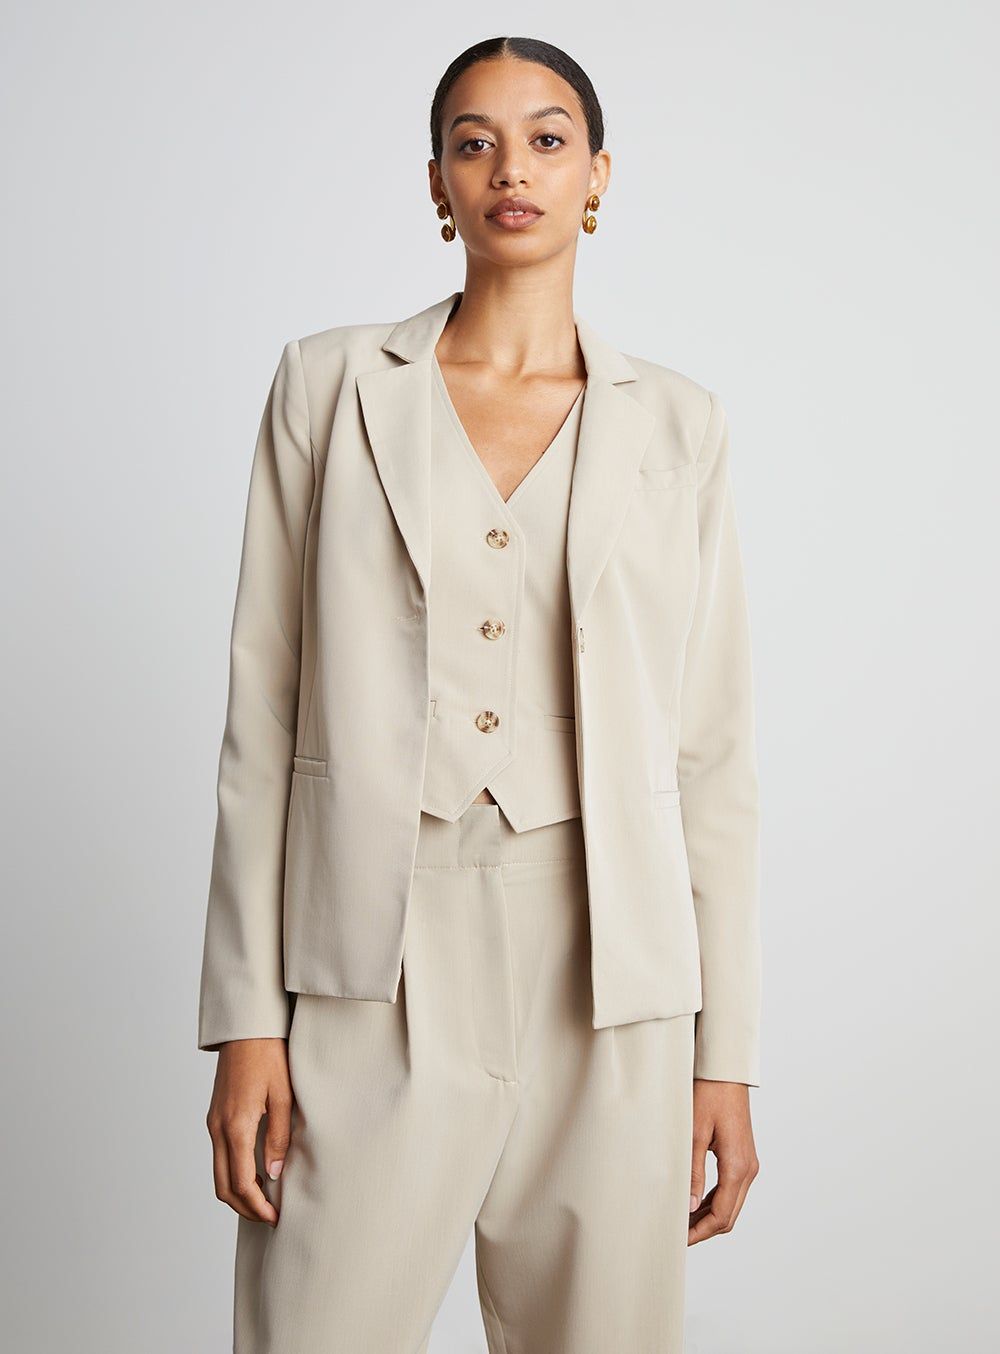 This New $35 H&M Blazer Is a French-Girl Staple | Who What Wear